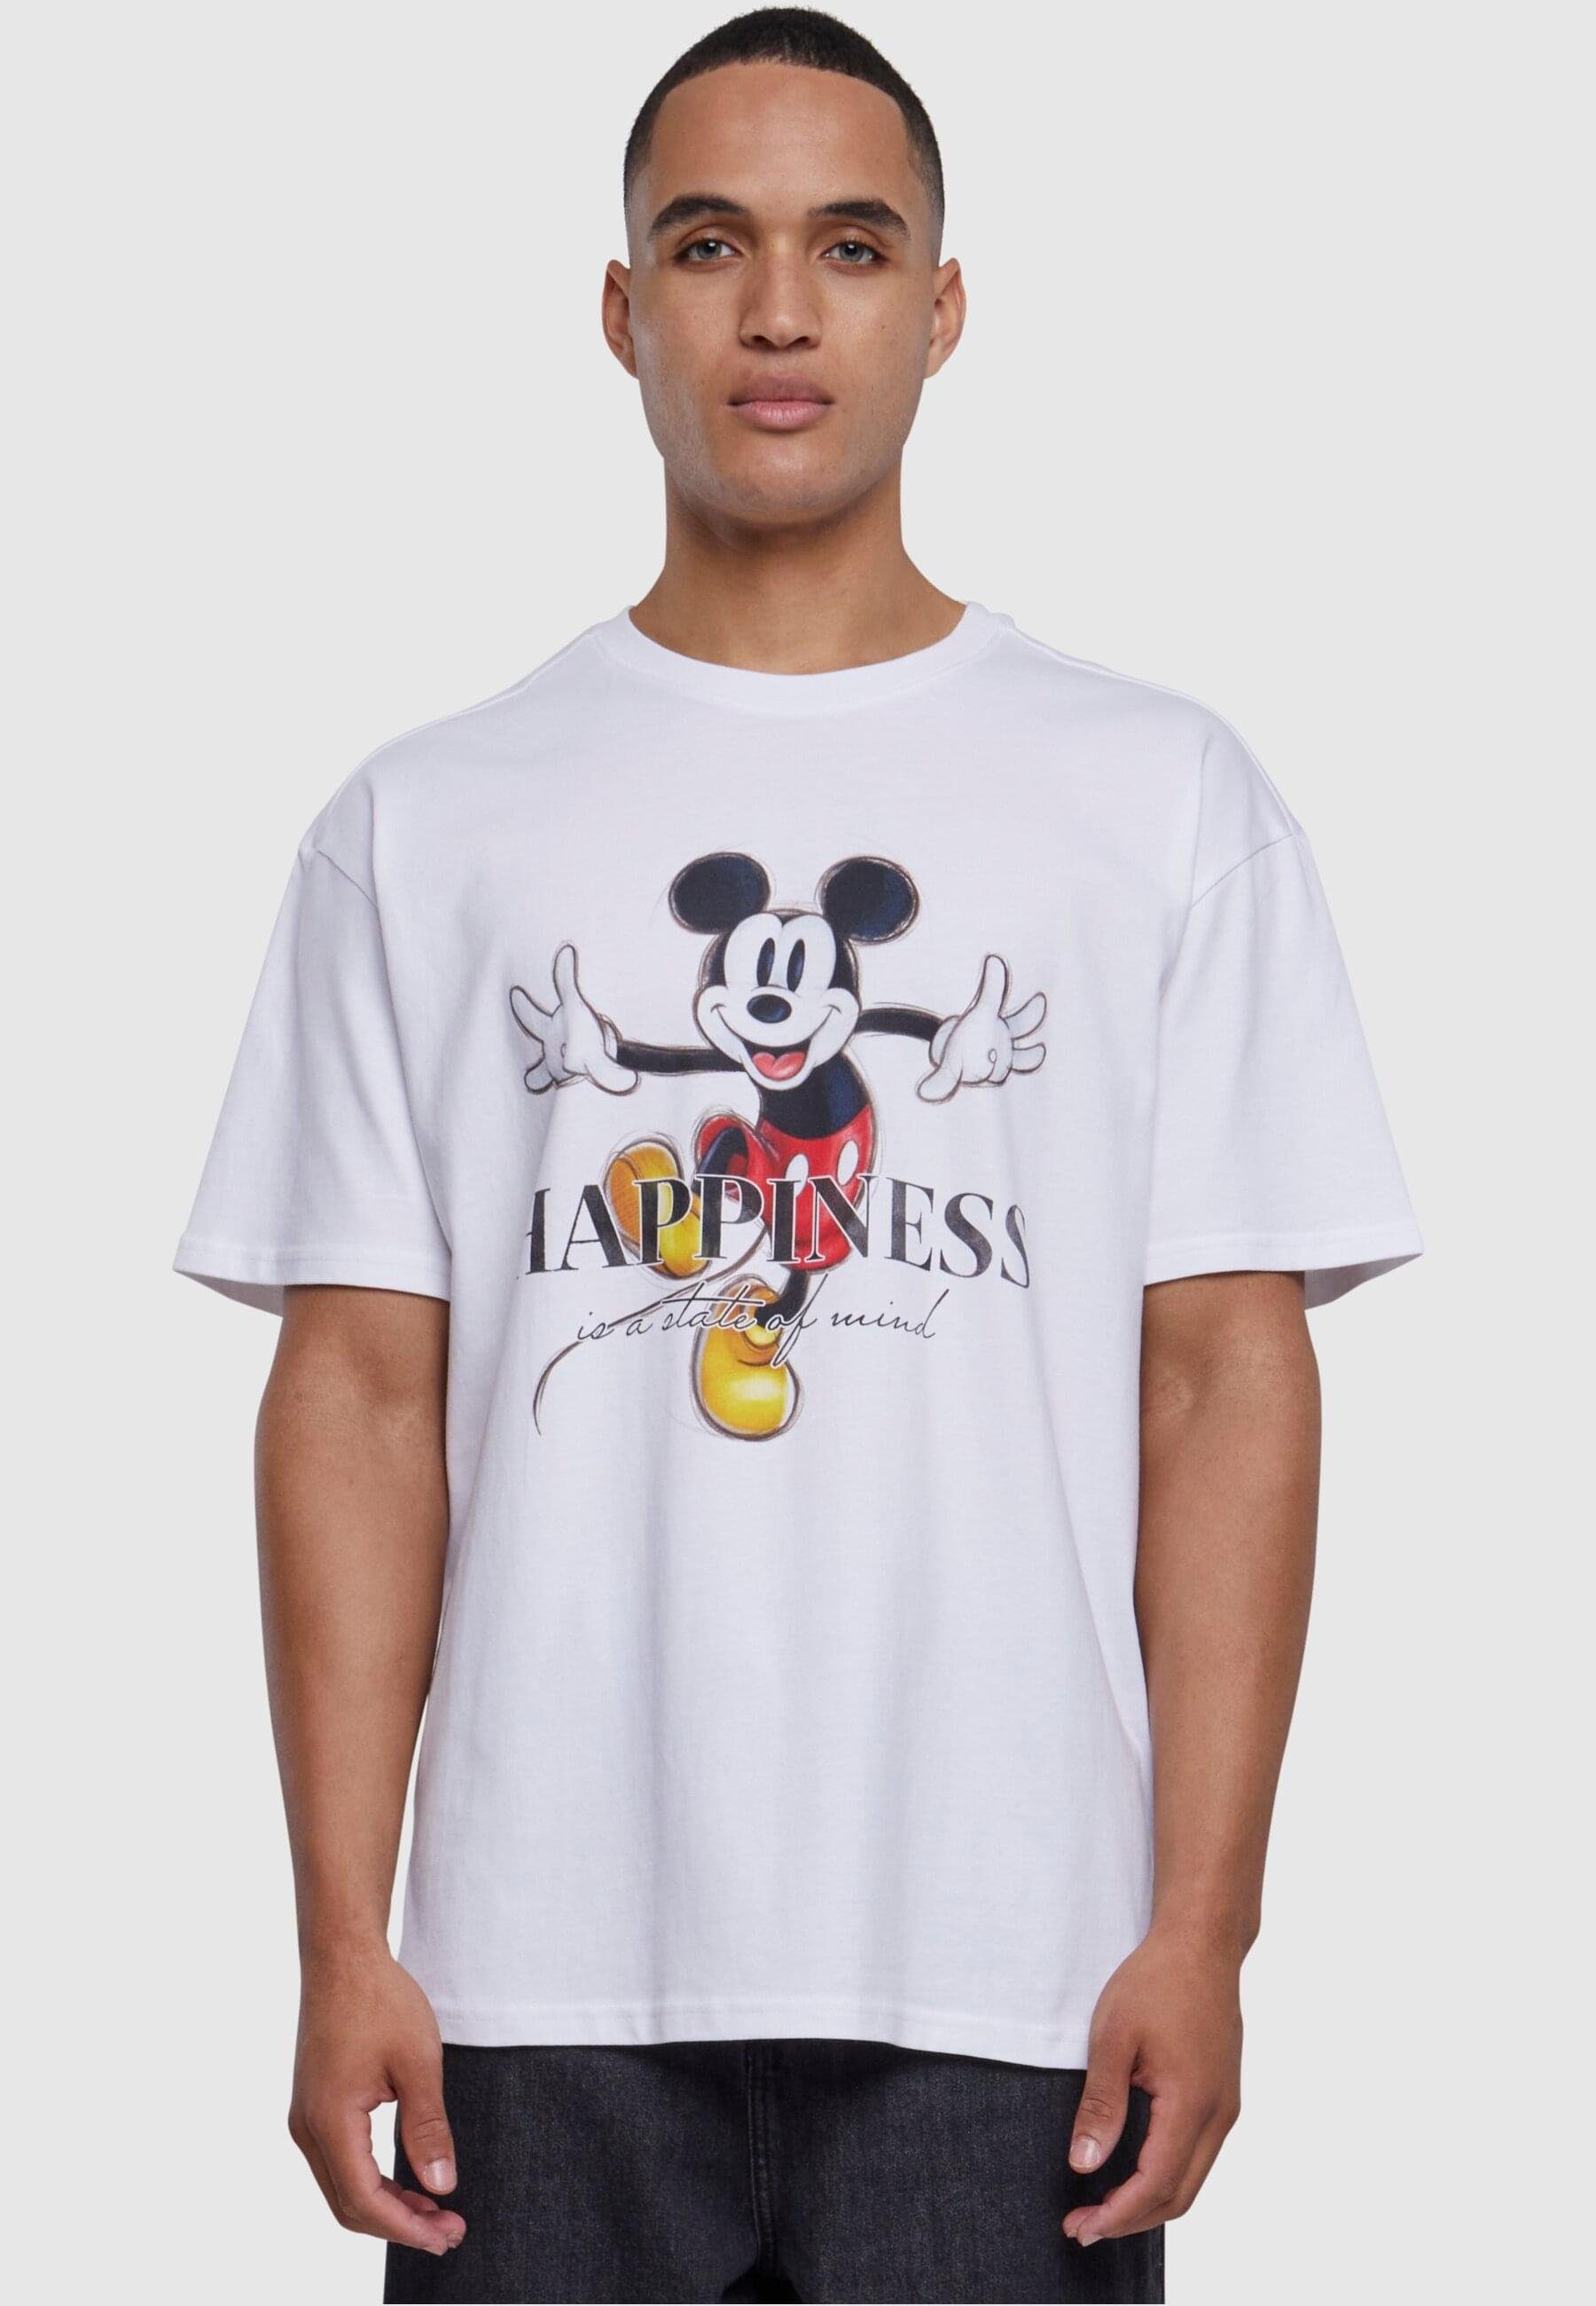 Tee Mister 100 Tee Mickey Oversize Unisex Upscale Disney Happiness by (1-tlg) T-Shirt